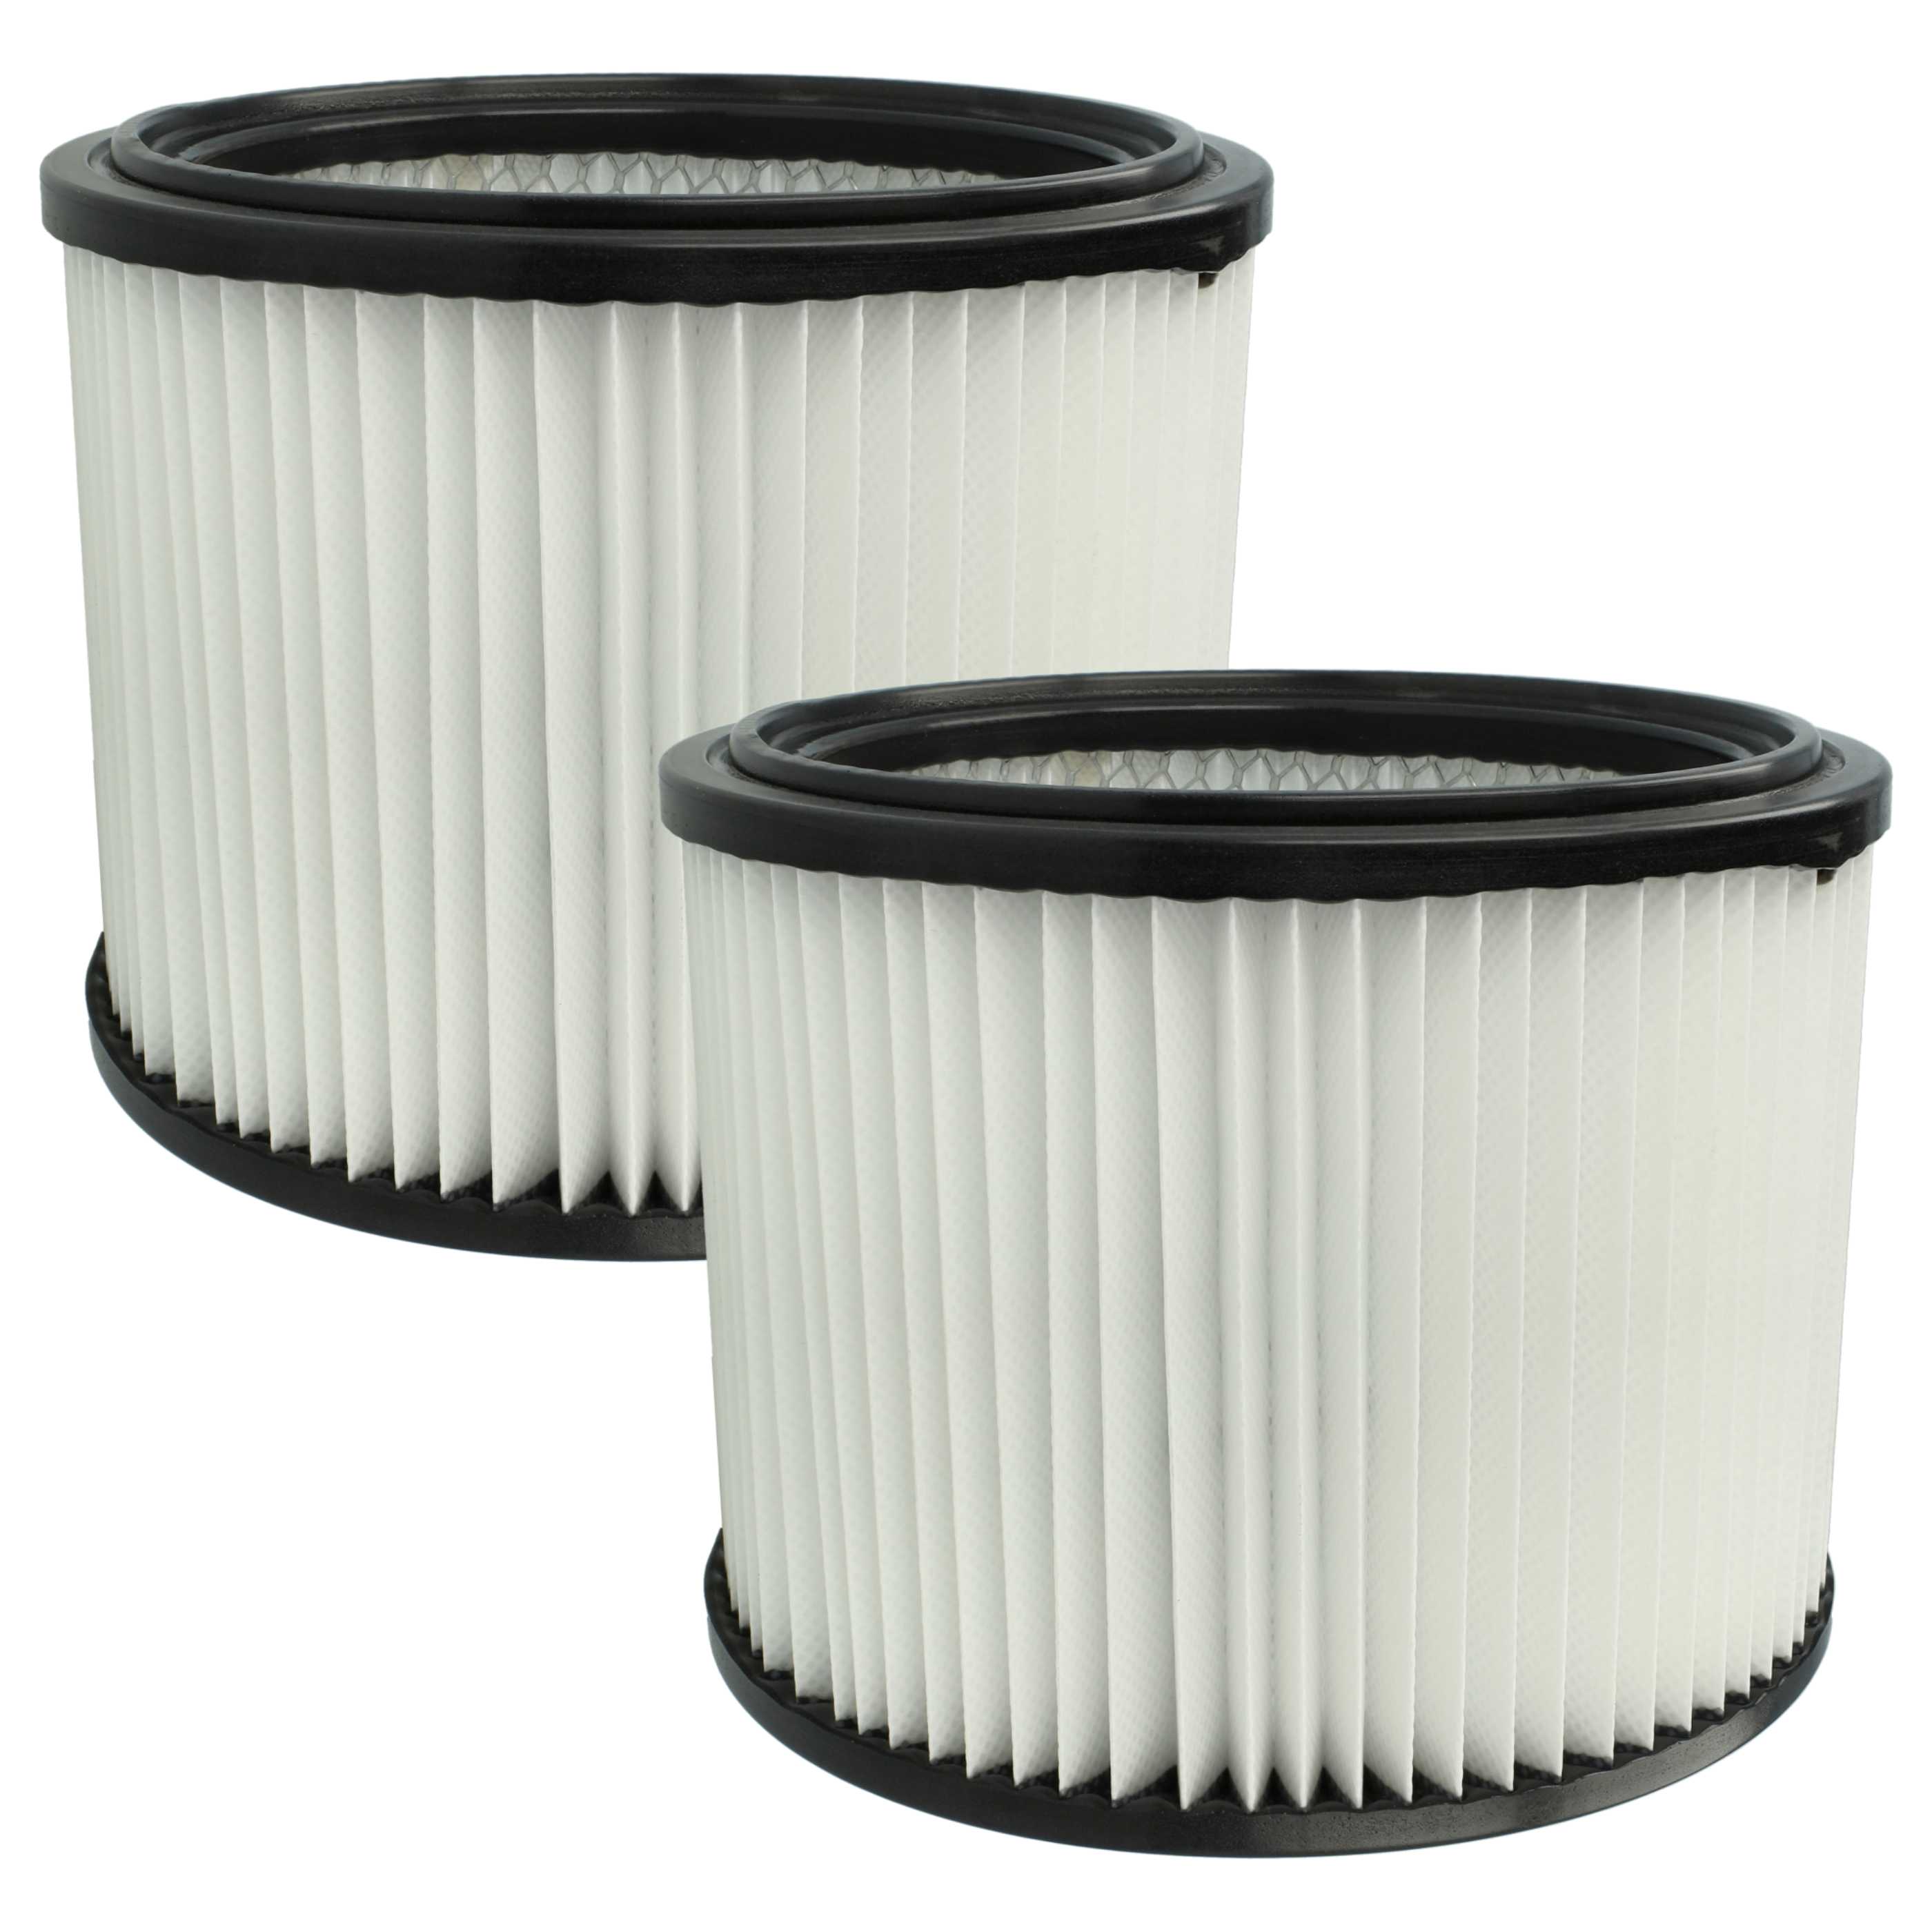 2x cartridge filter replaces Starmix FPP 3500 WS, 460727 for Starmix Vacuum Cleaner, black / white